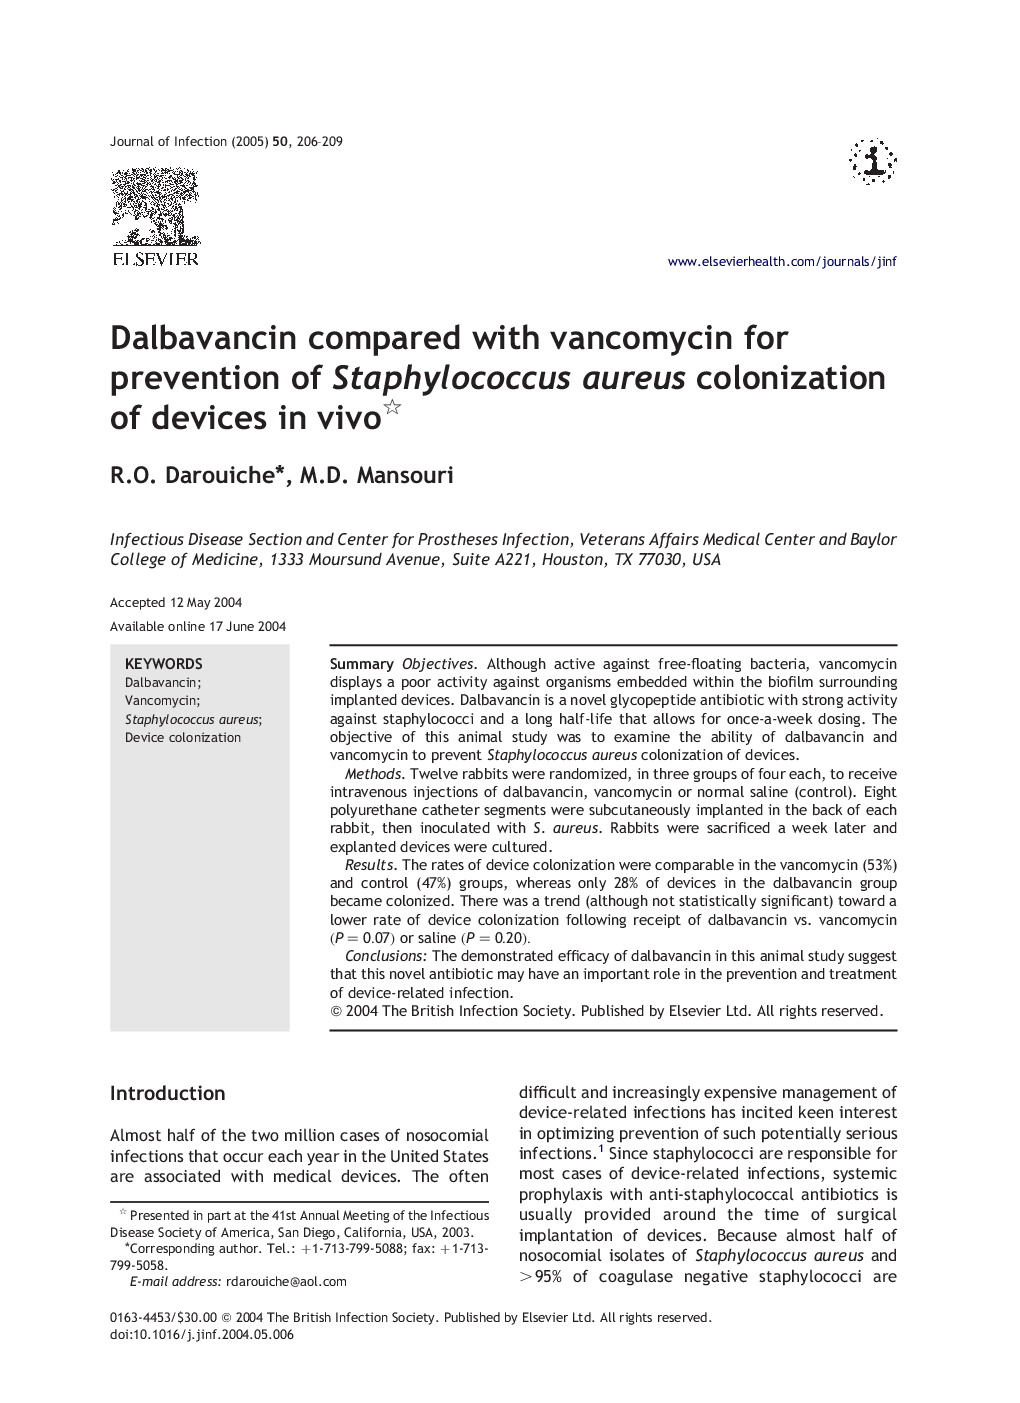 Dalbavancin compared with vancomycin for prevention of Staphylococcus aureus colonization of devices in vivo